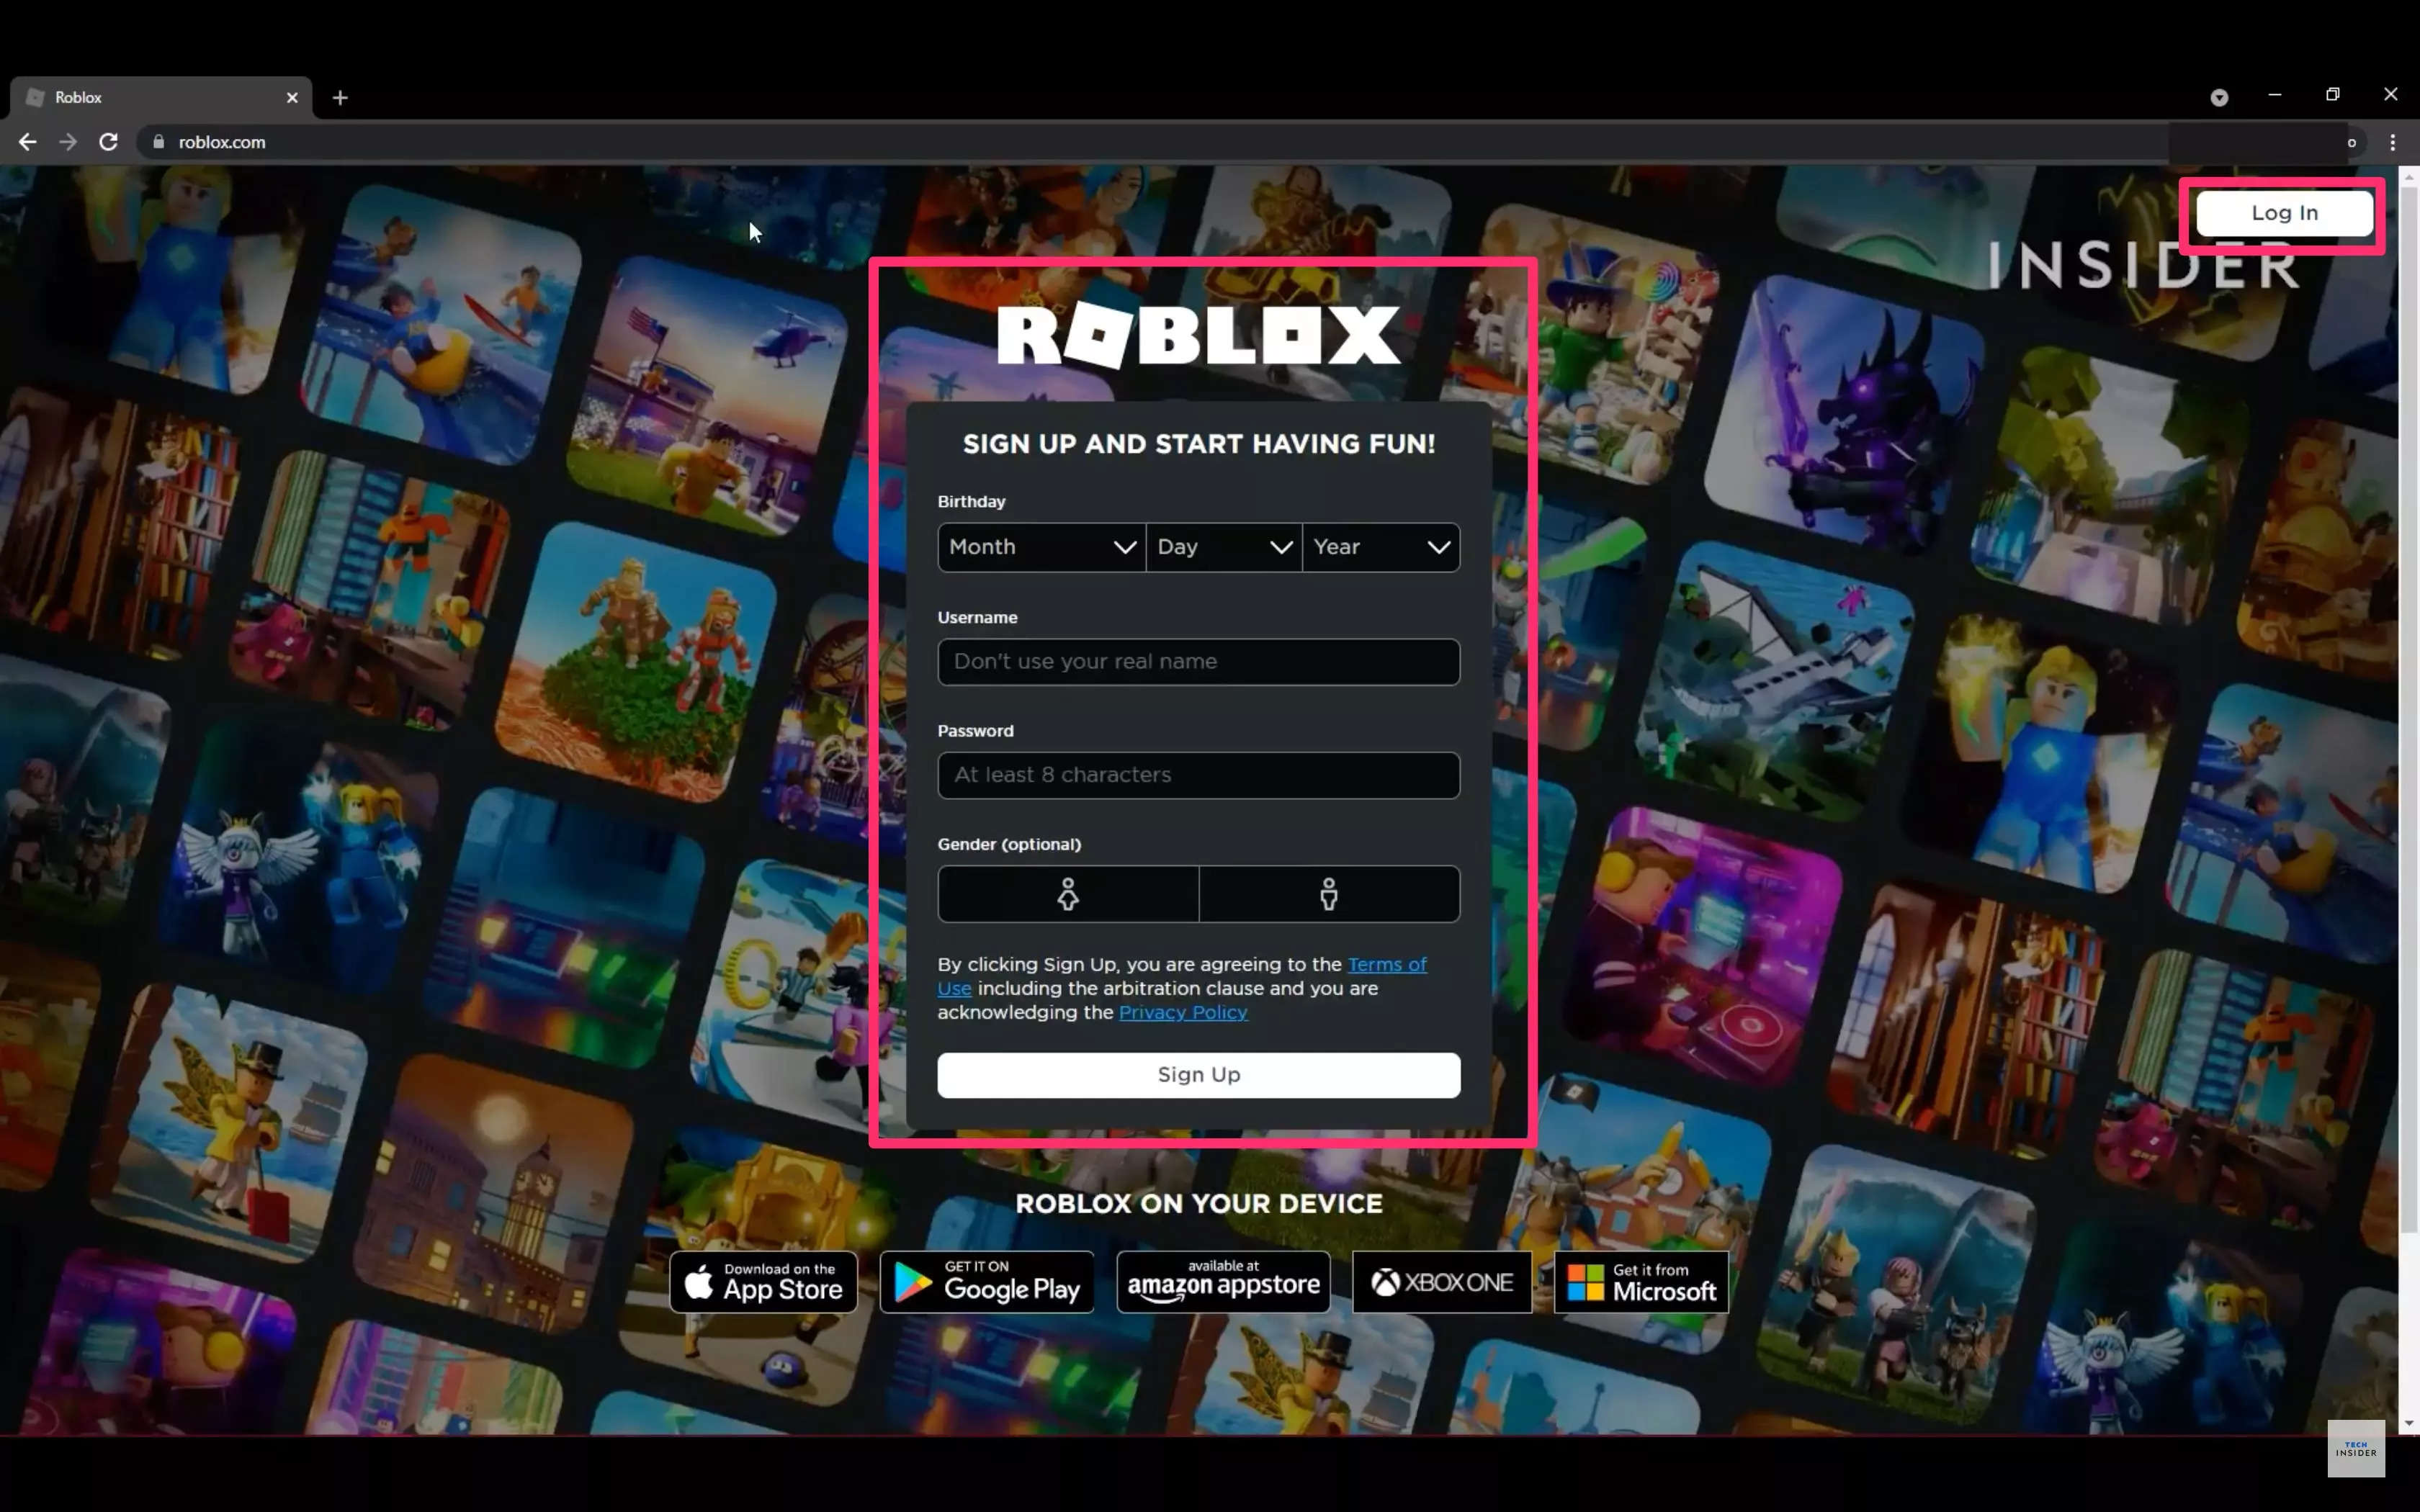 How to download, install, update Roblox on PC